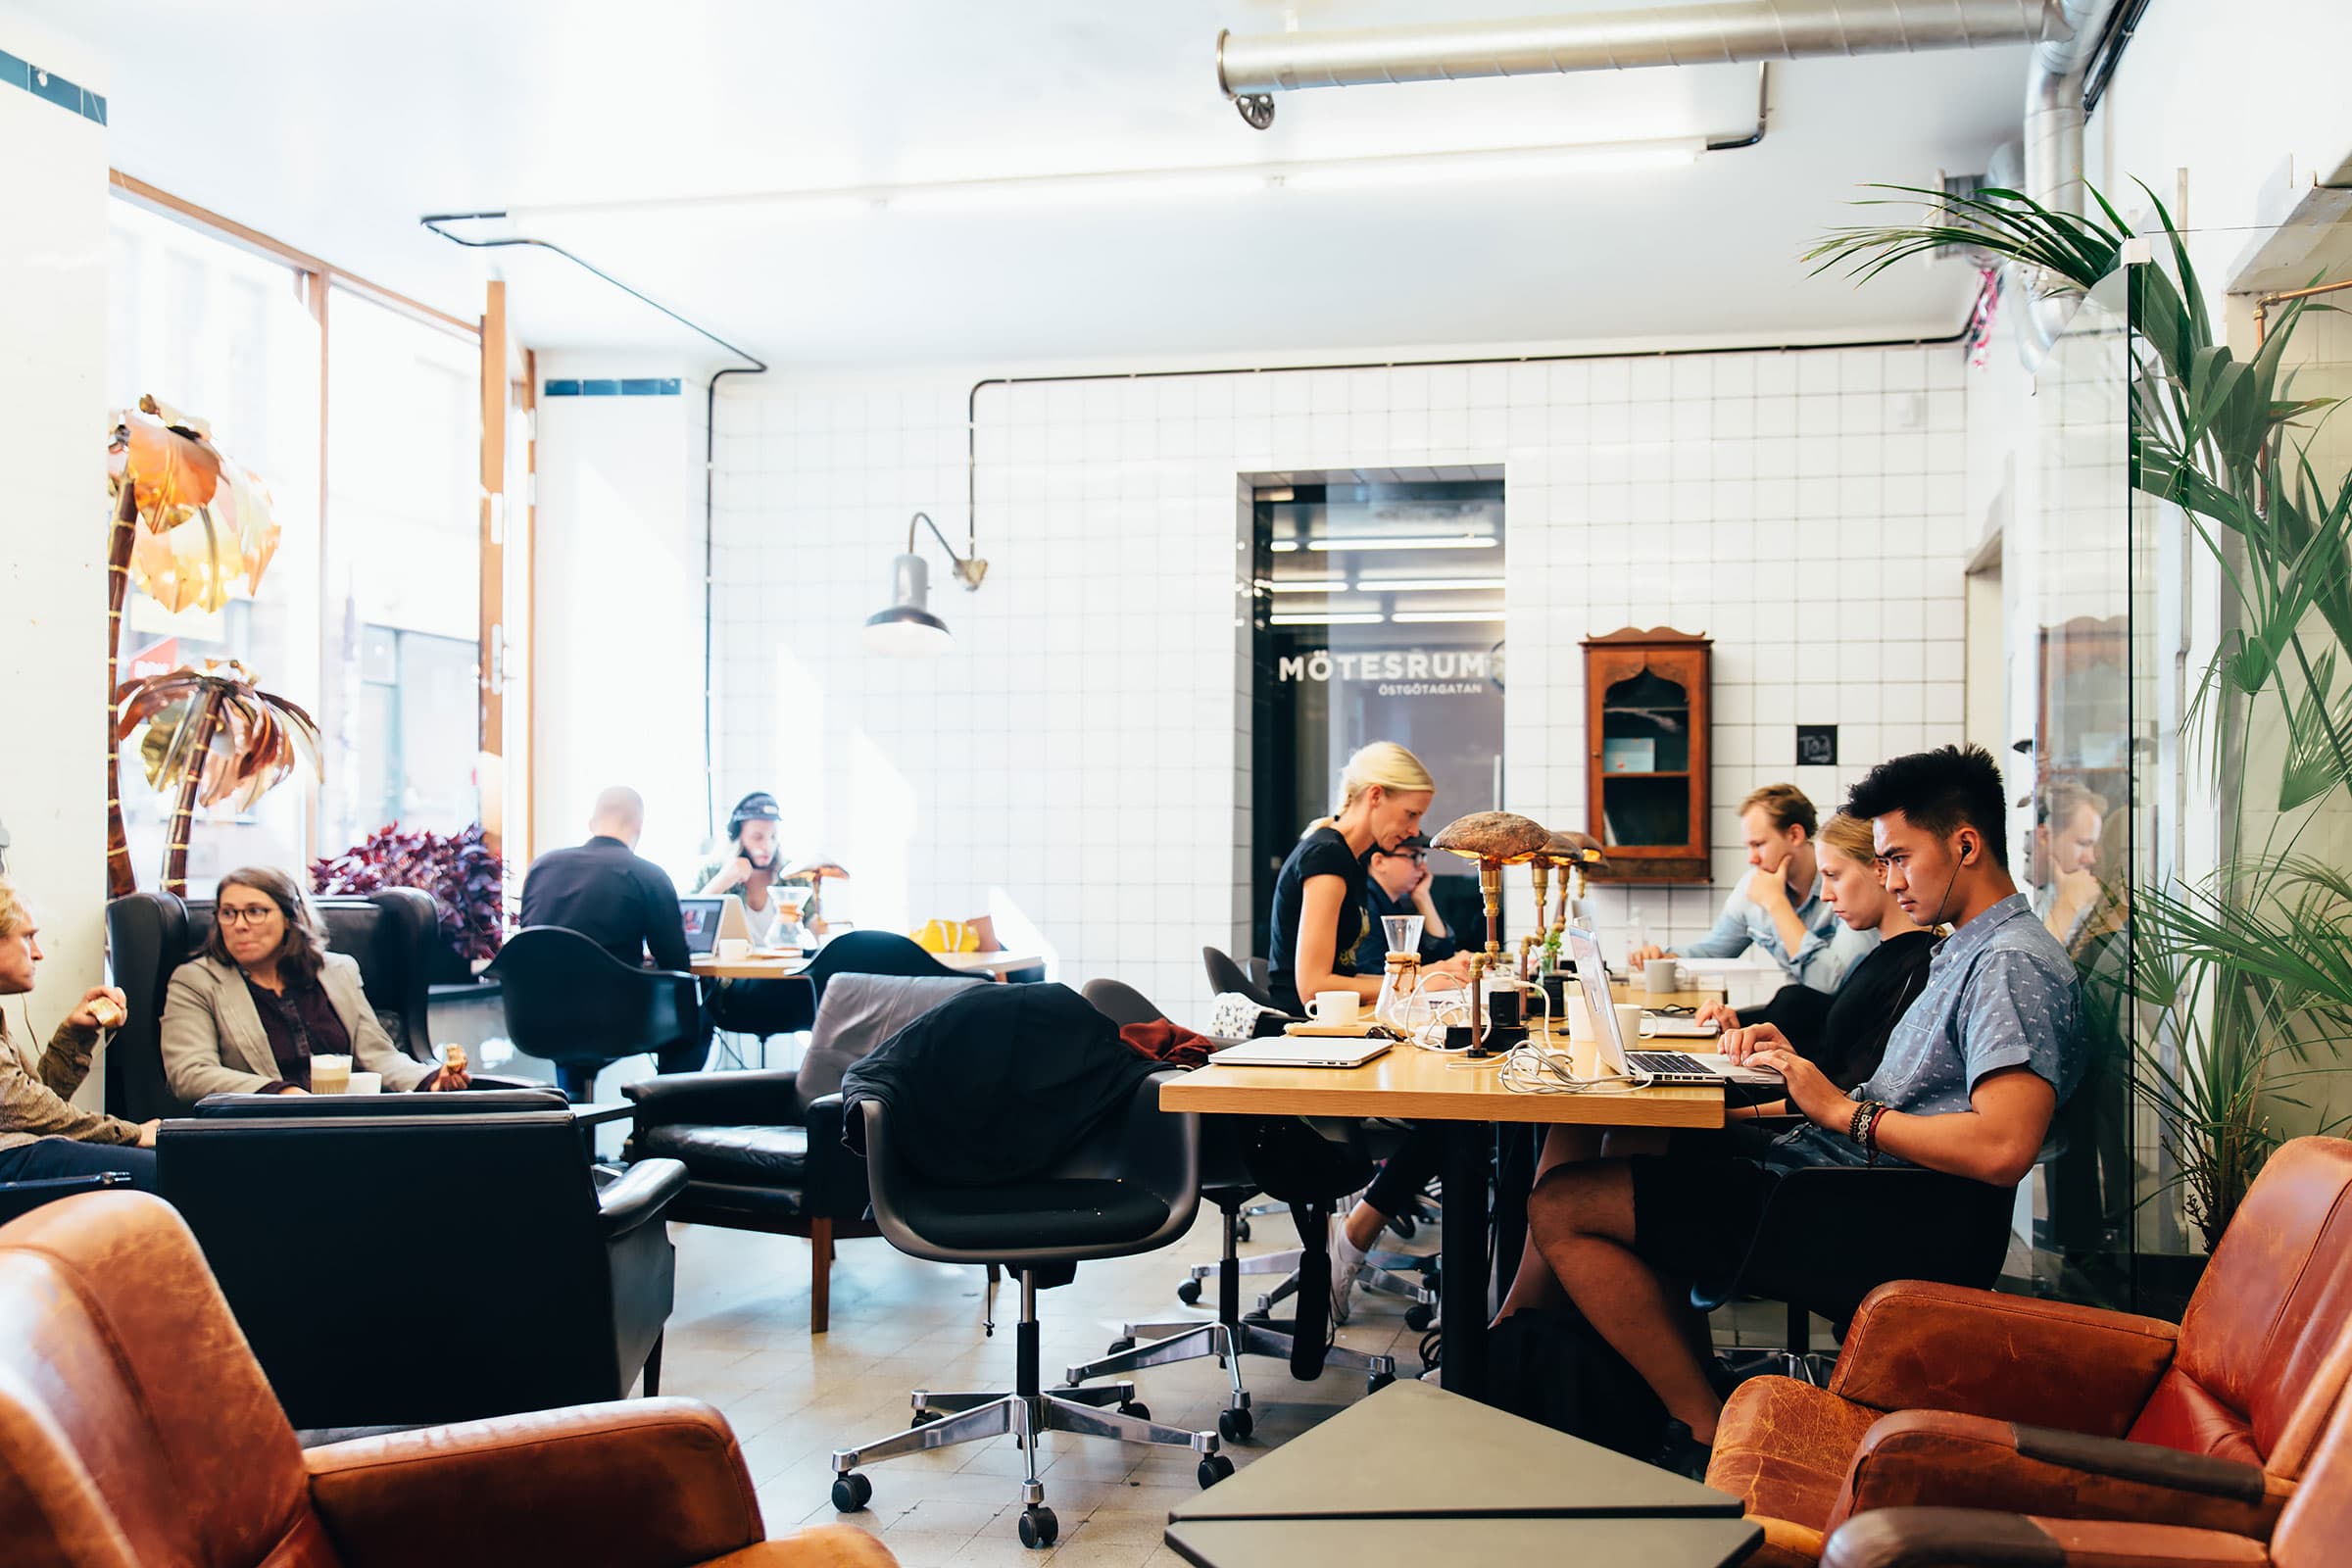 The guide to study- and work-friendly caf&eacute;s in Gothenburg